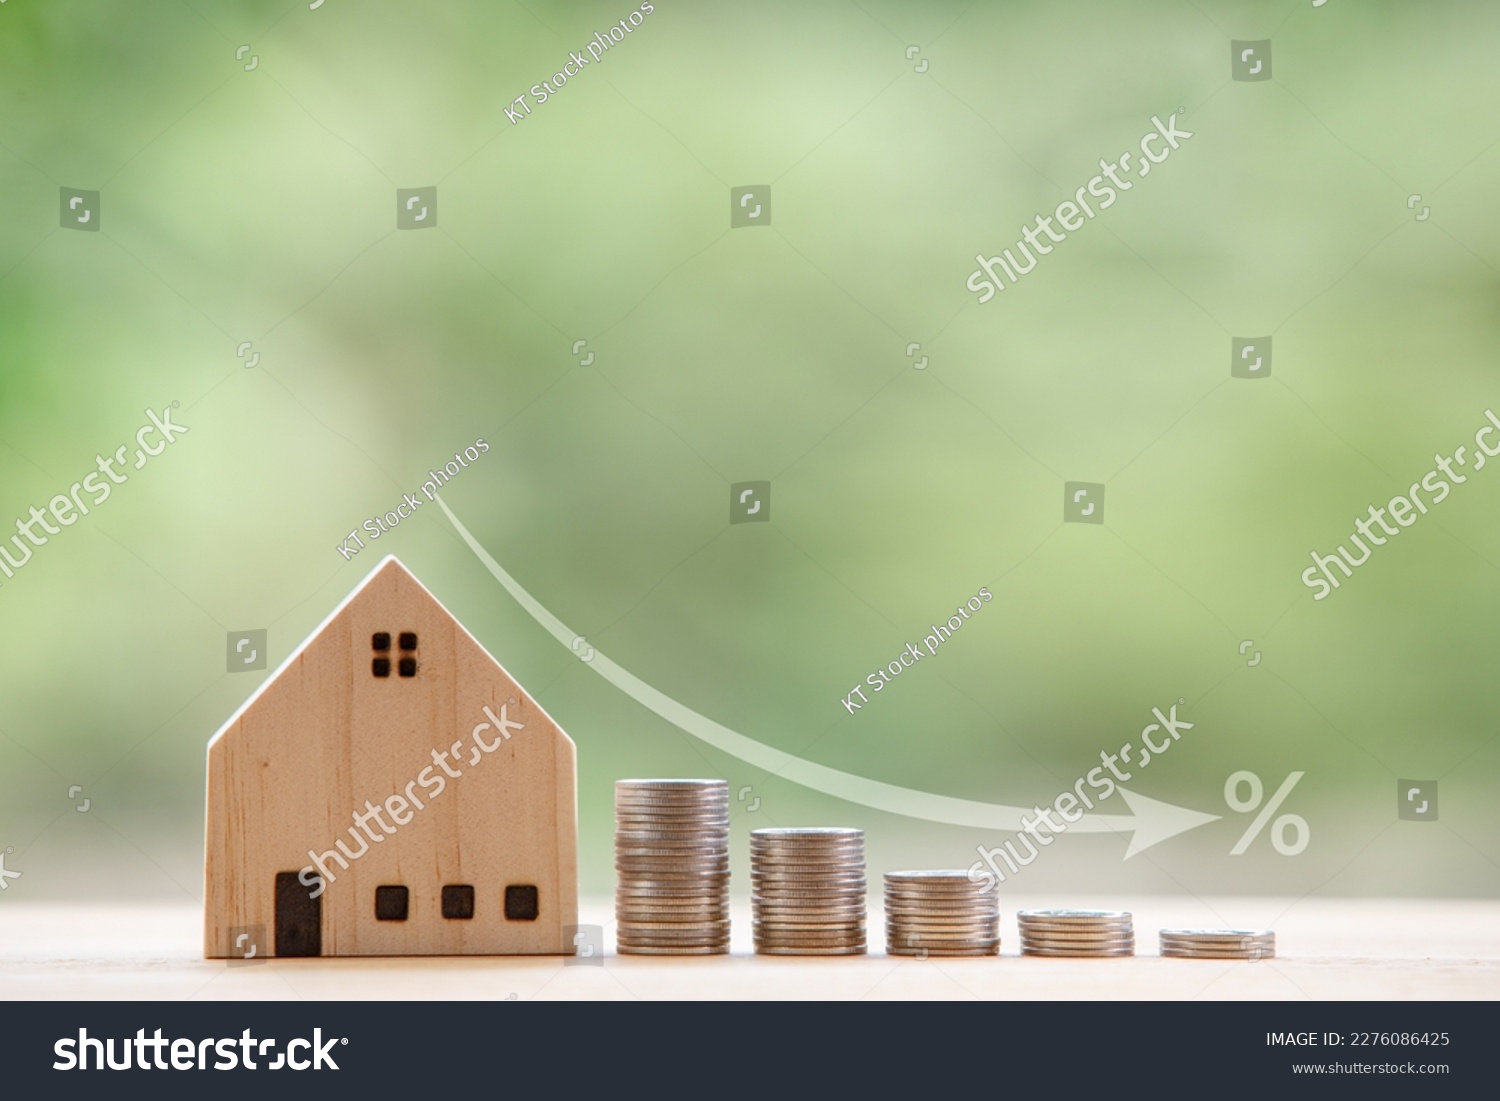 Model wooden house in front of a natural green backdrop and an arrow showing a falling rate of interest. Strategic ideas to get lower interest rates when buying and mortgage a home. #2276086425